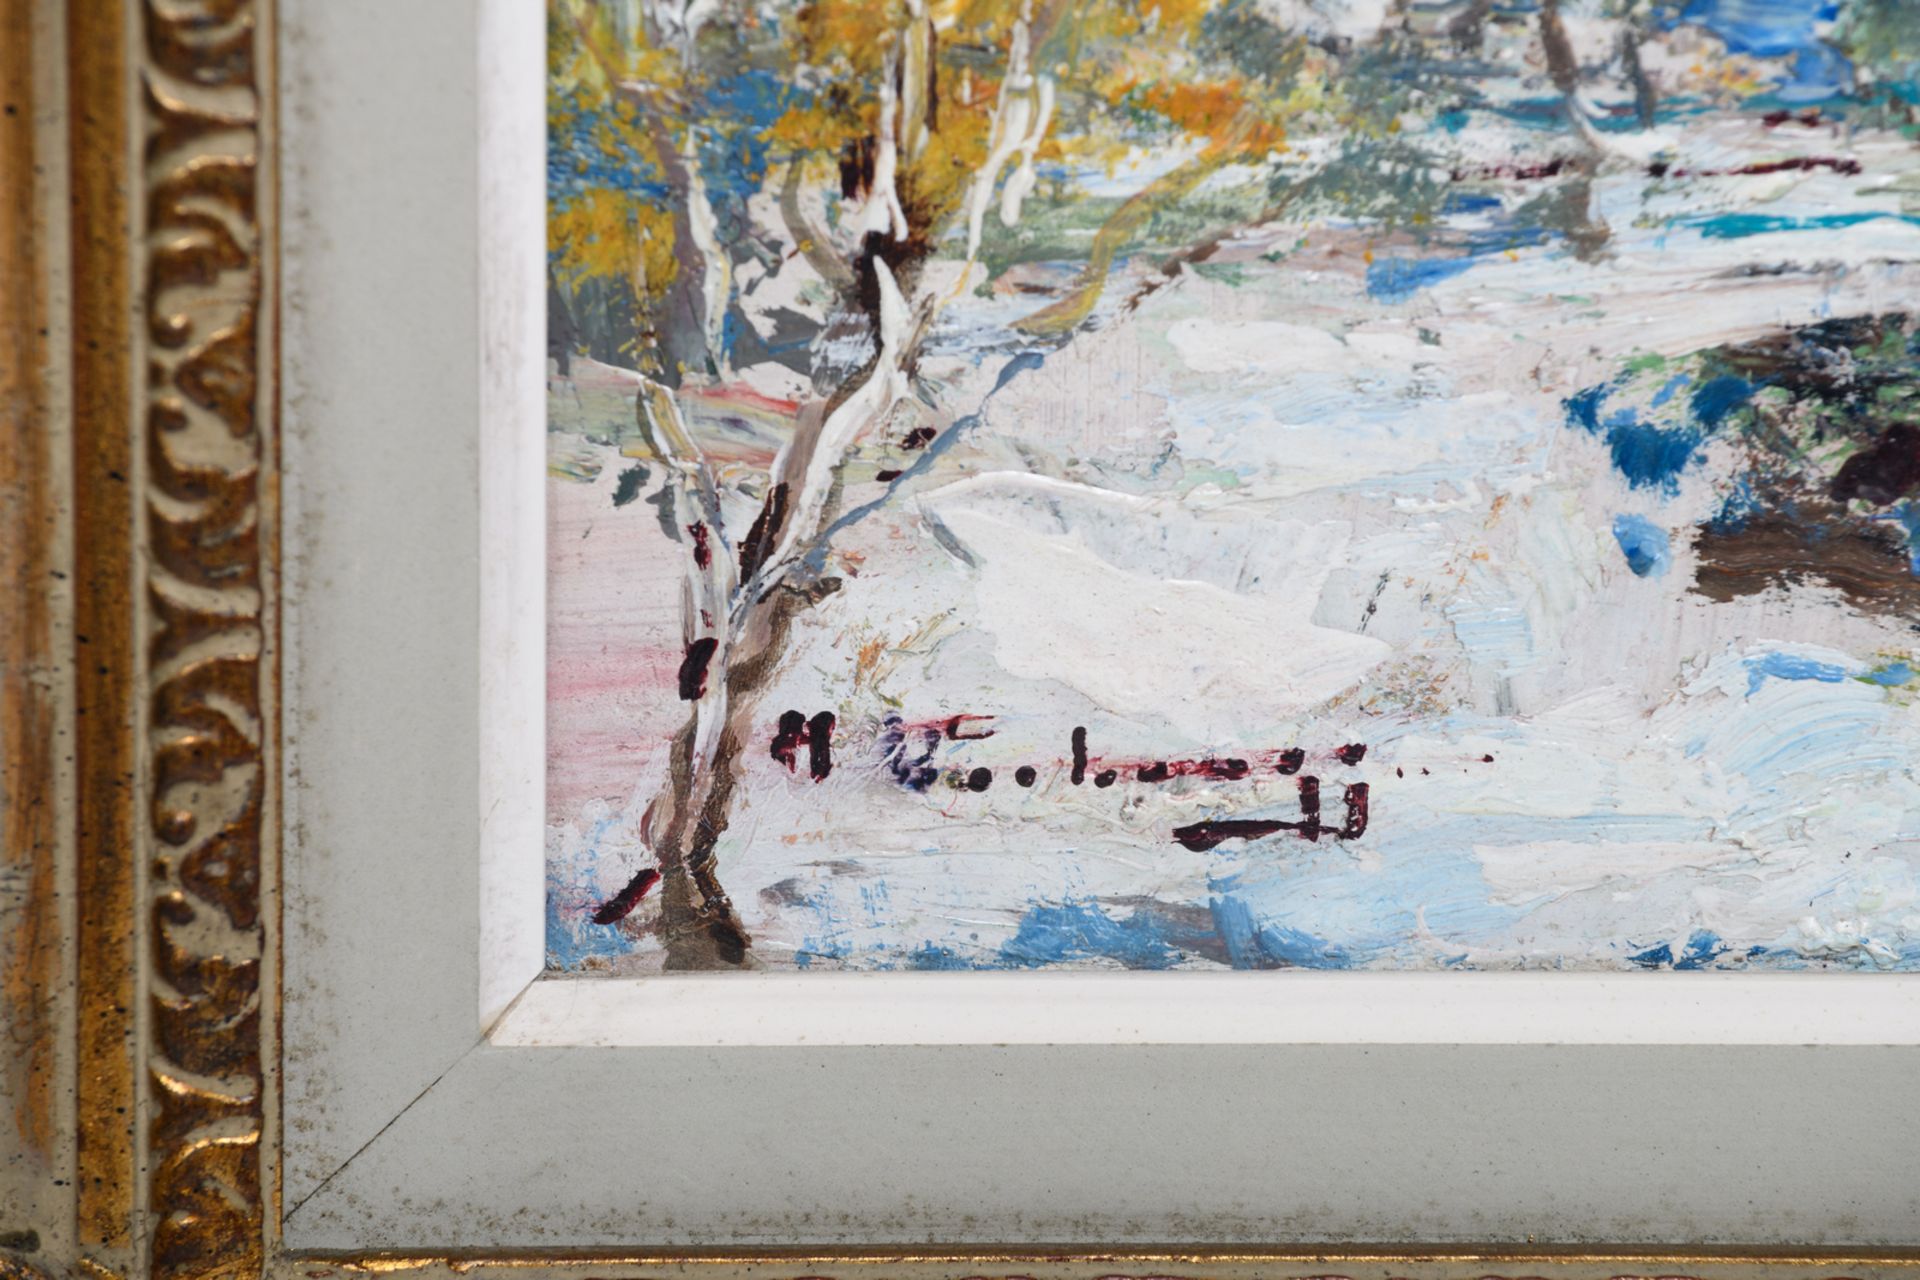 Verbrugghe C., 'Paysage D'Hyver' and a winter landscape, oil on board, 15 x 31 and 37,5 x 54,5 cm - Image 6 of 6